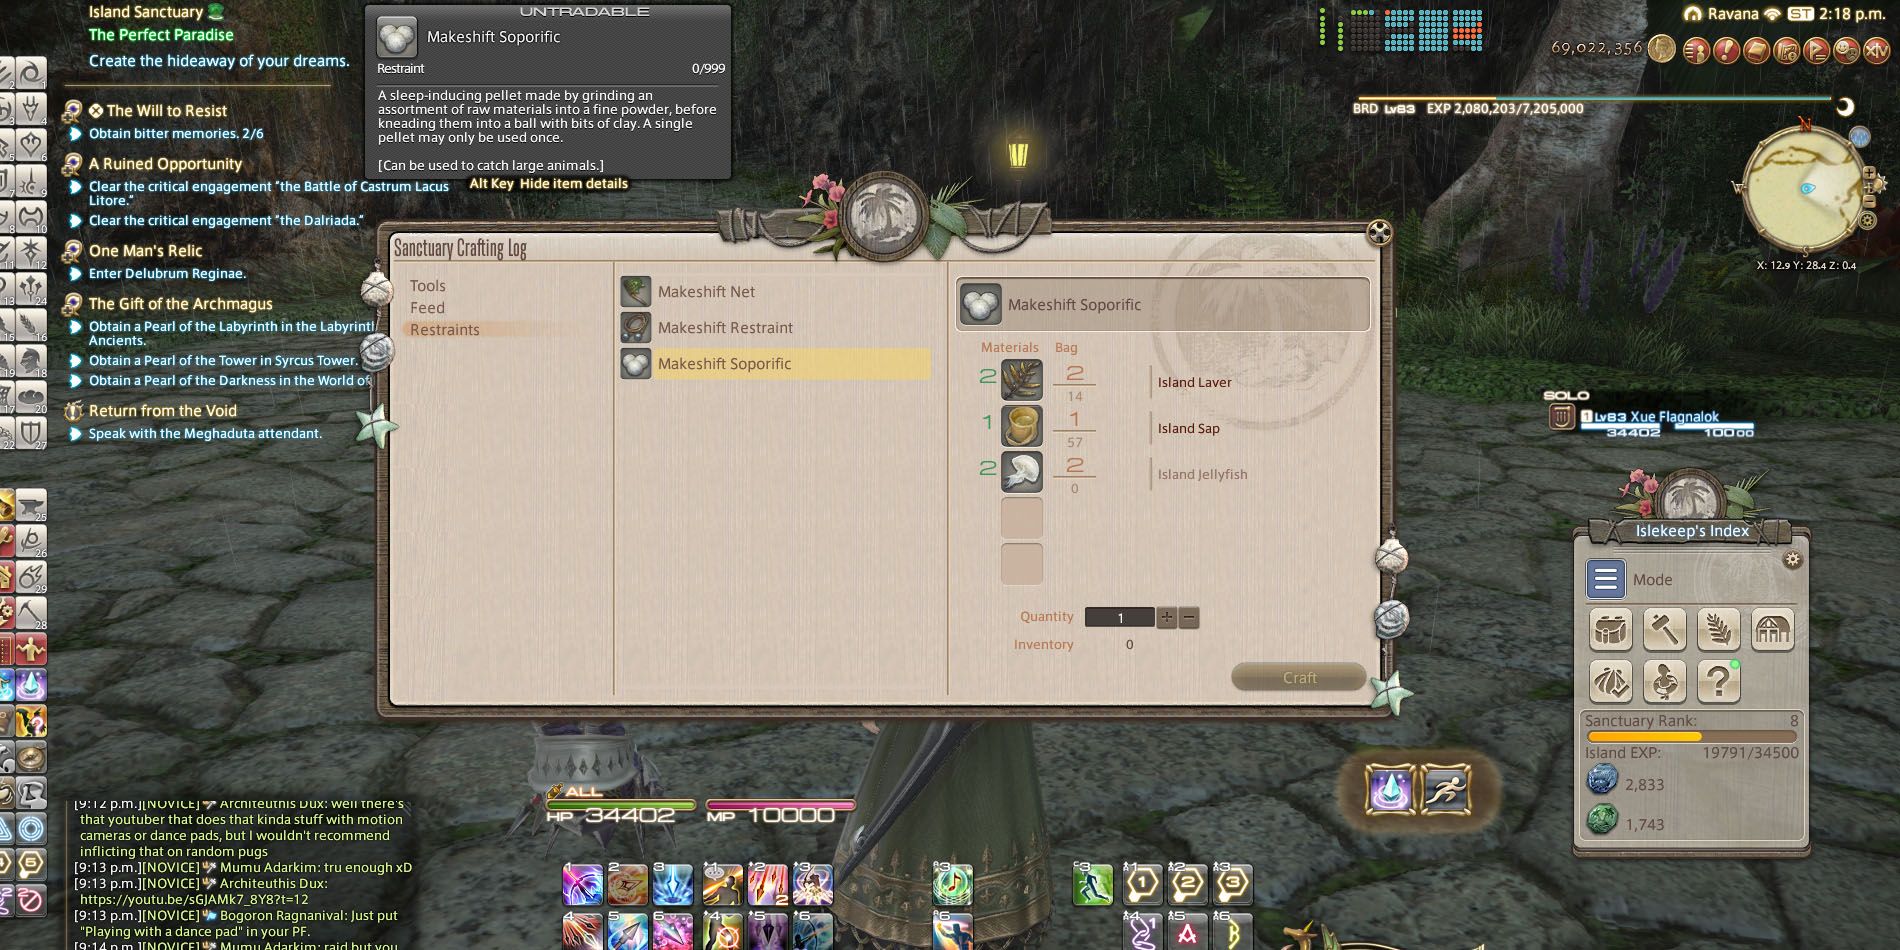 FFXIV: Island Sanctuary Animal Spawn Guide (Times, Locations, & Materials)